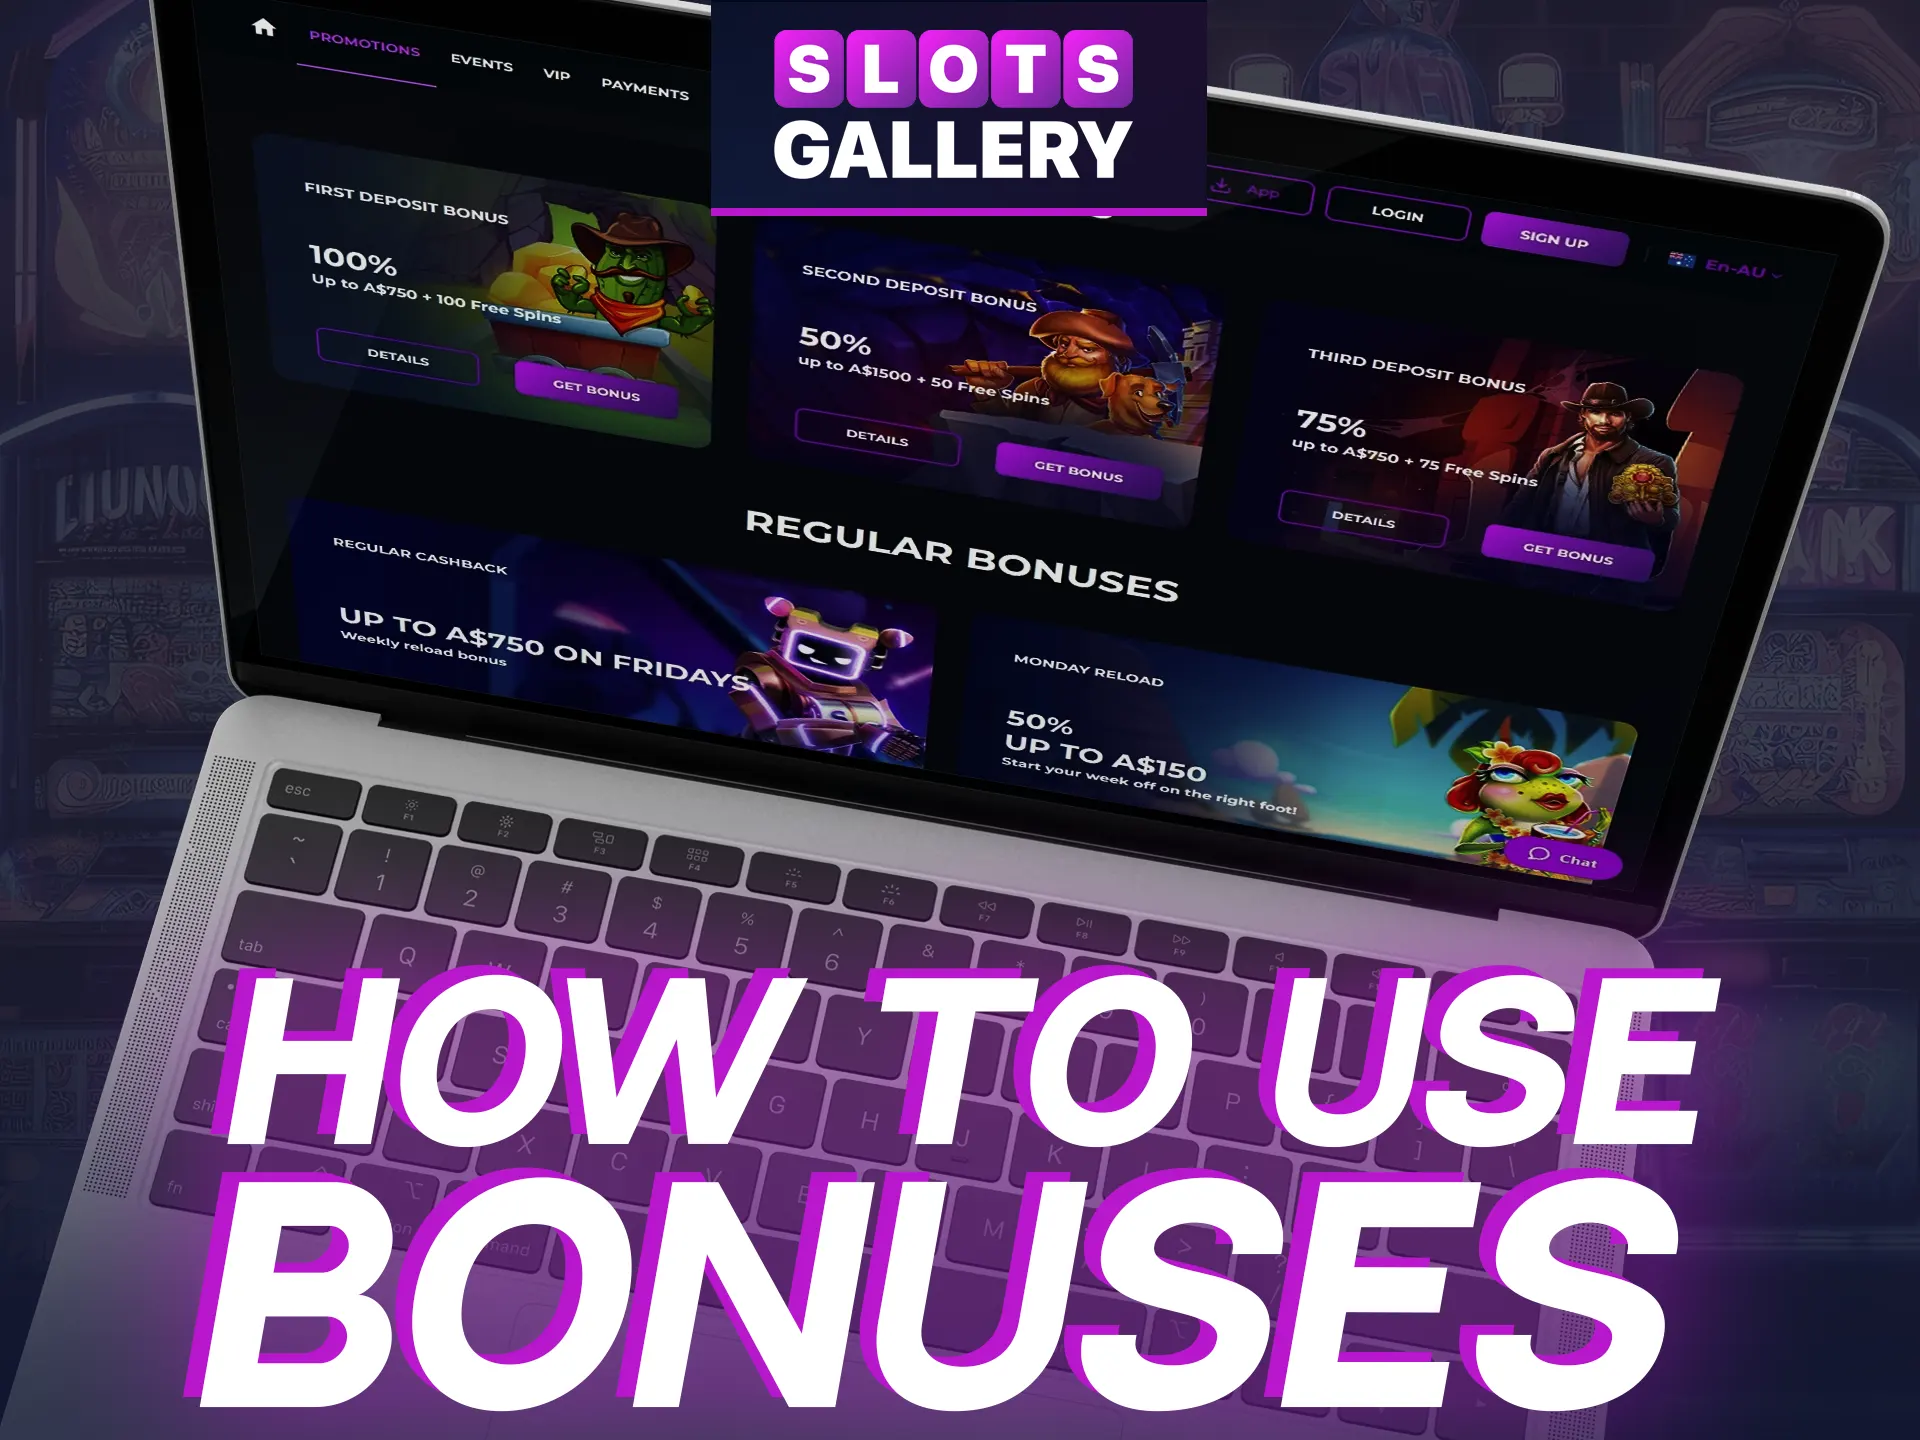 Learn how to use Slots Gallery bonuses.